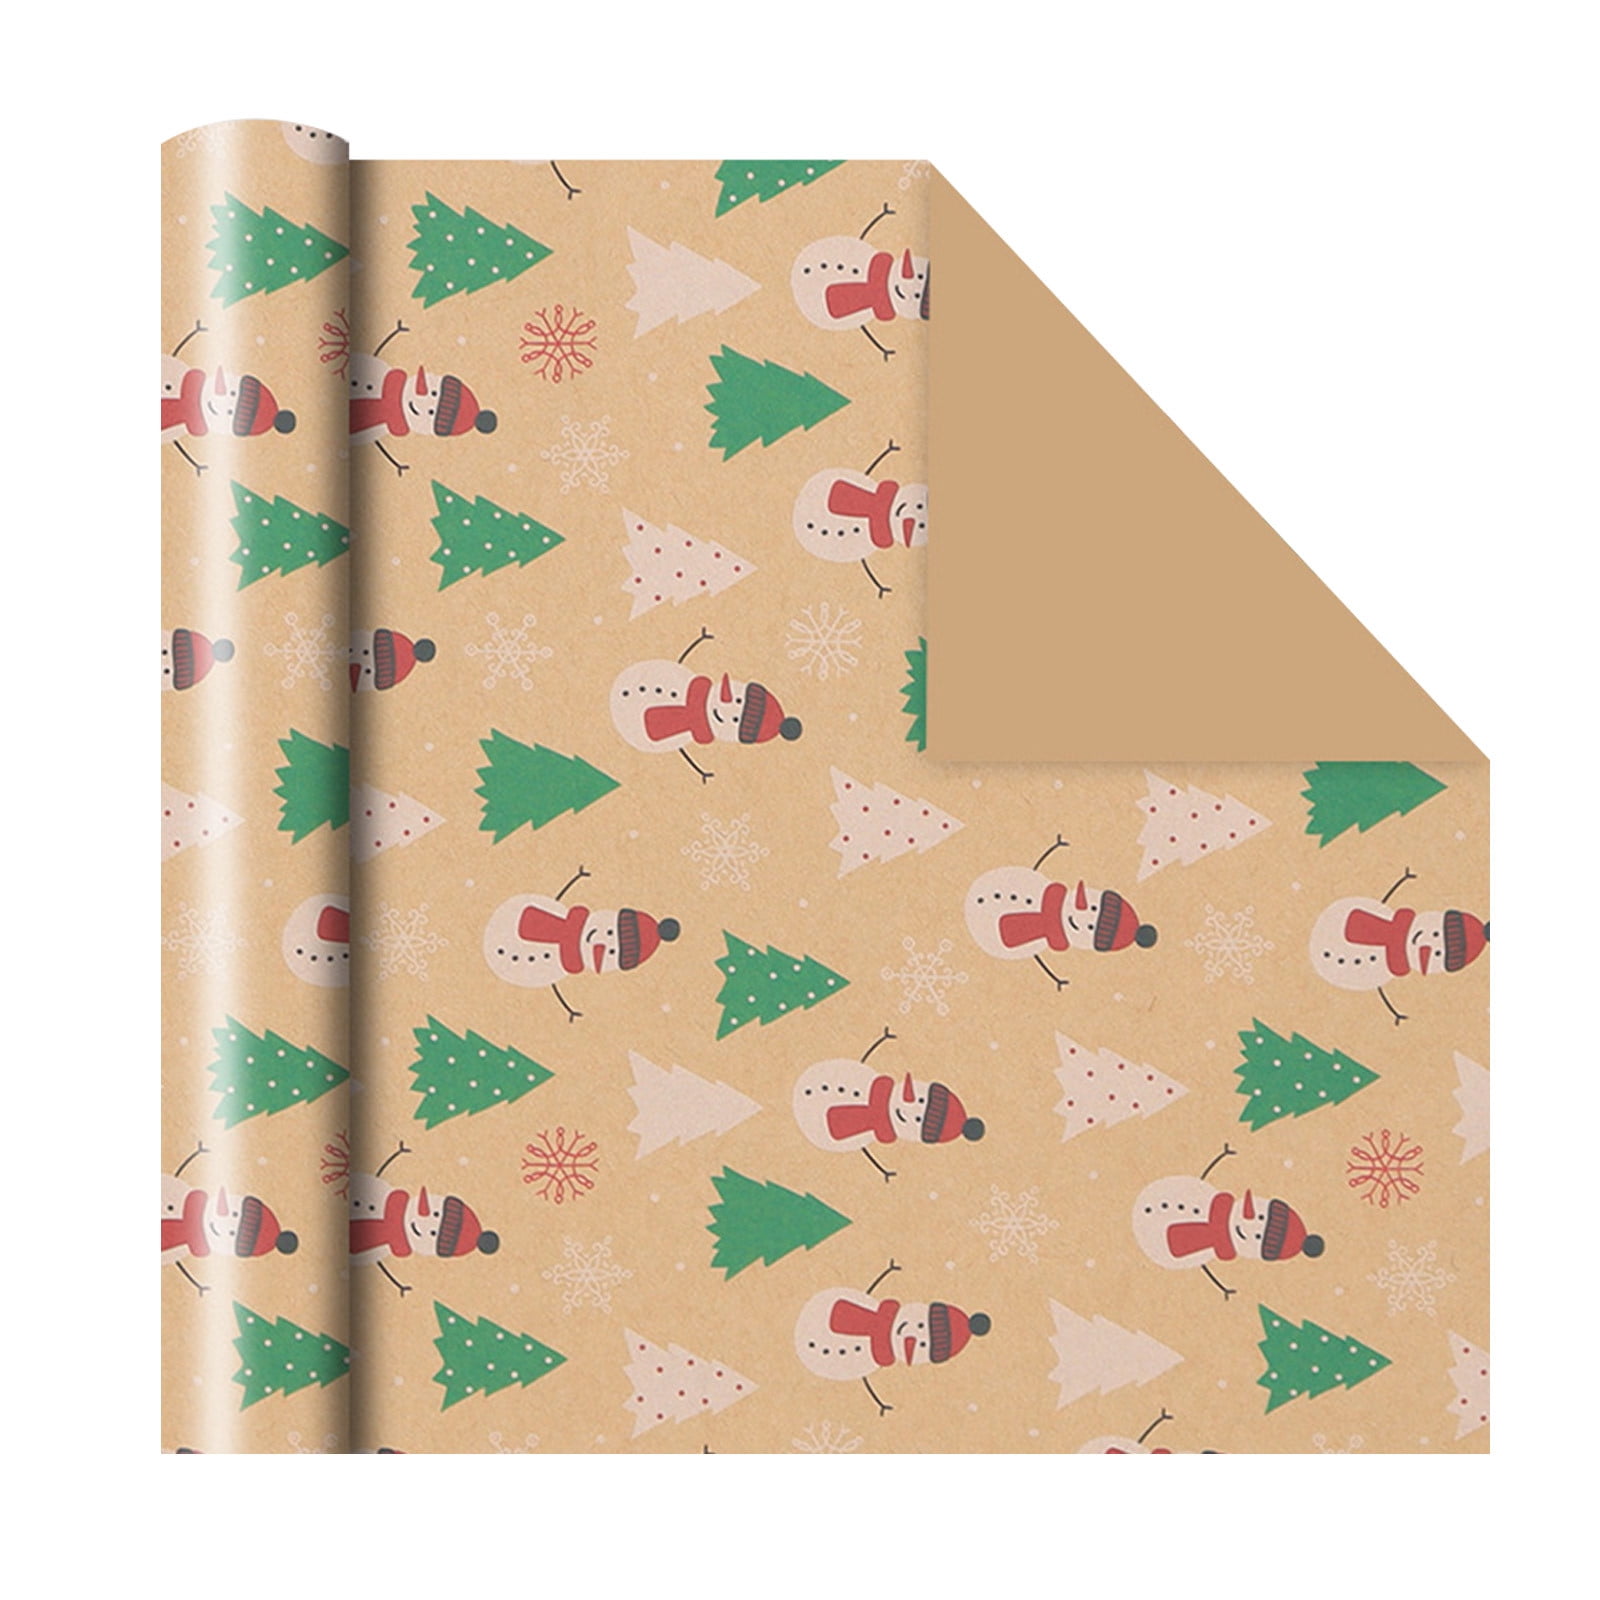 LSLJS Christmas Wrapping Paper Clearance, Christmas Gift Wrapping